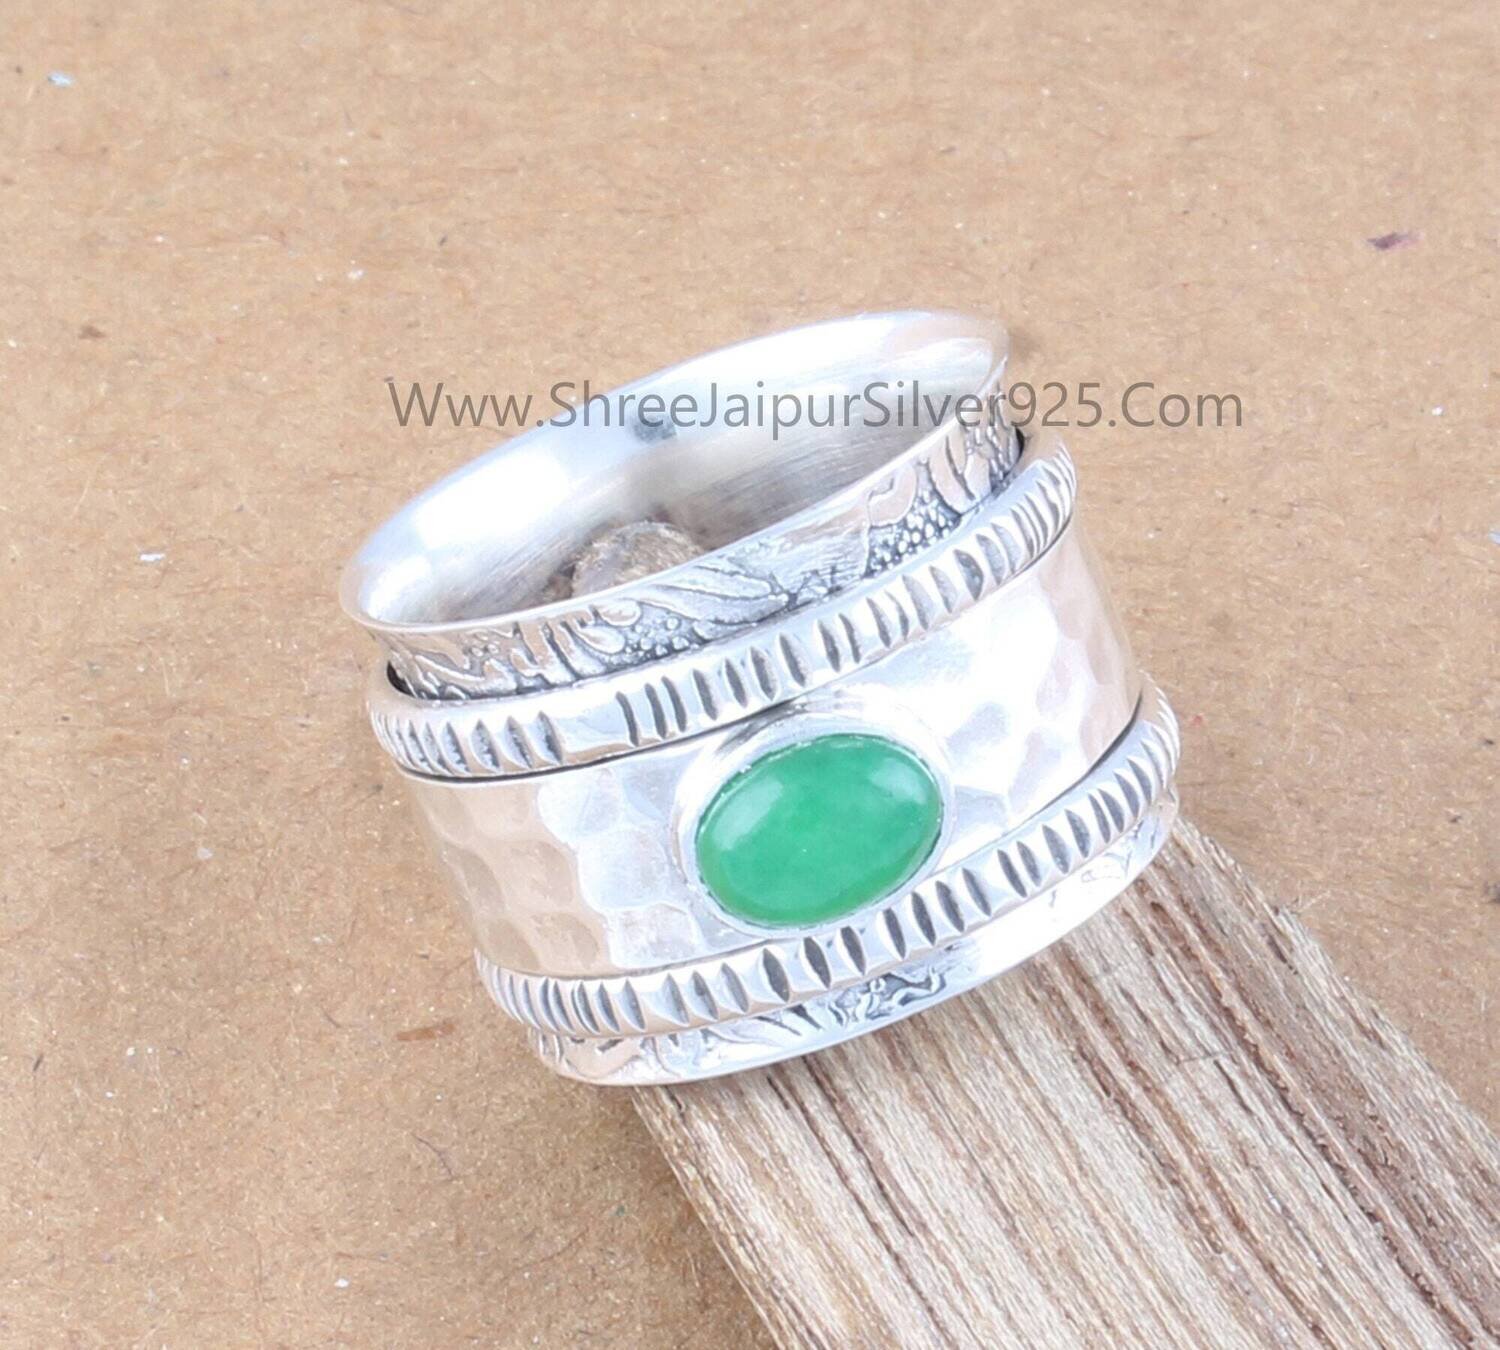 Green Jade Engraved Band Solid 925 Sterling Silver Spinner Ring For Women, Handmade Hammered Band Anxiety Fidget Ring Gifts For Anniversary